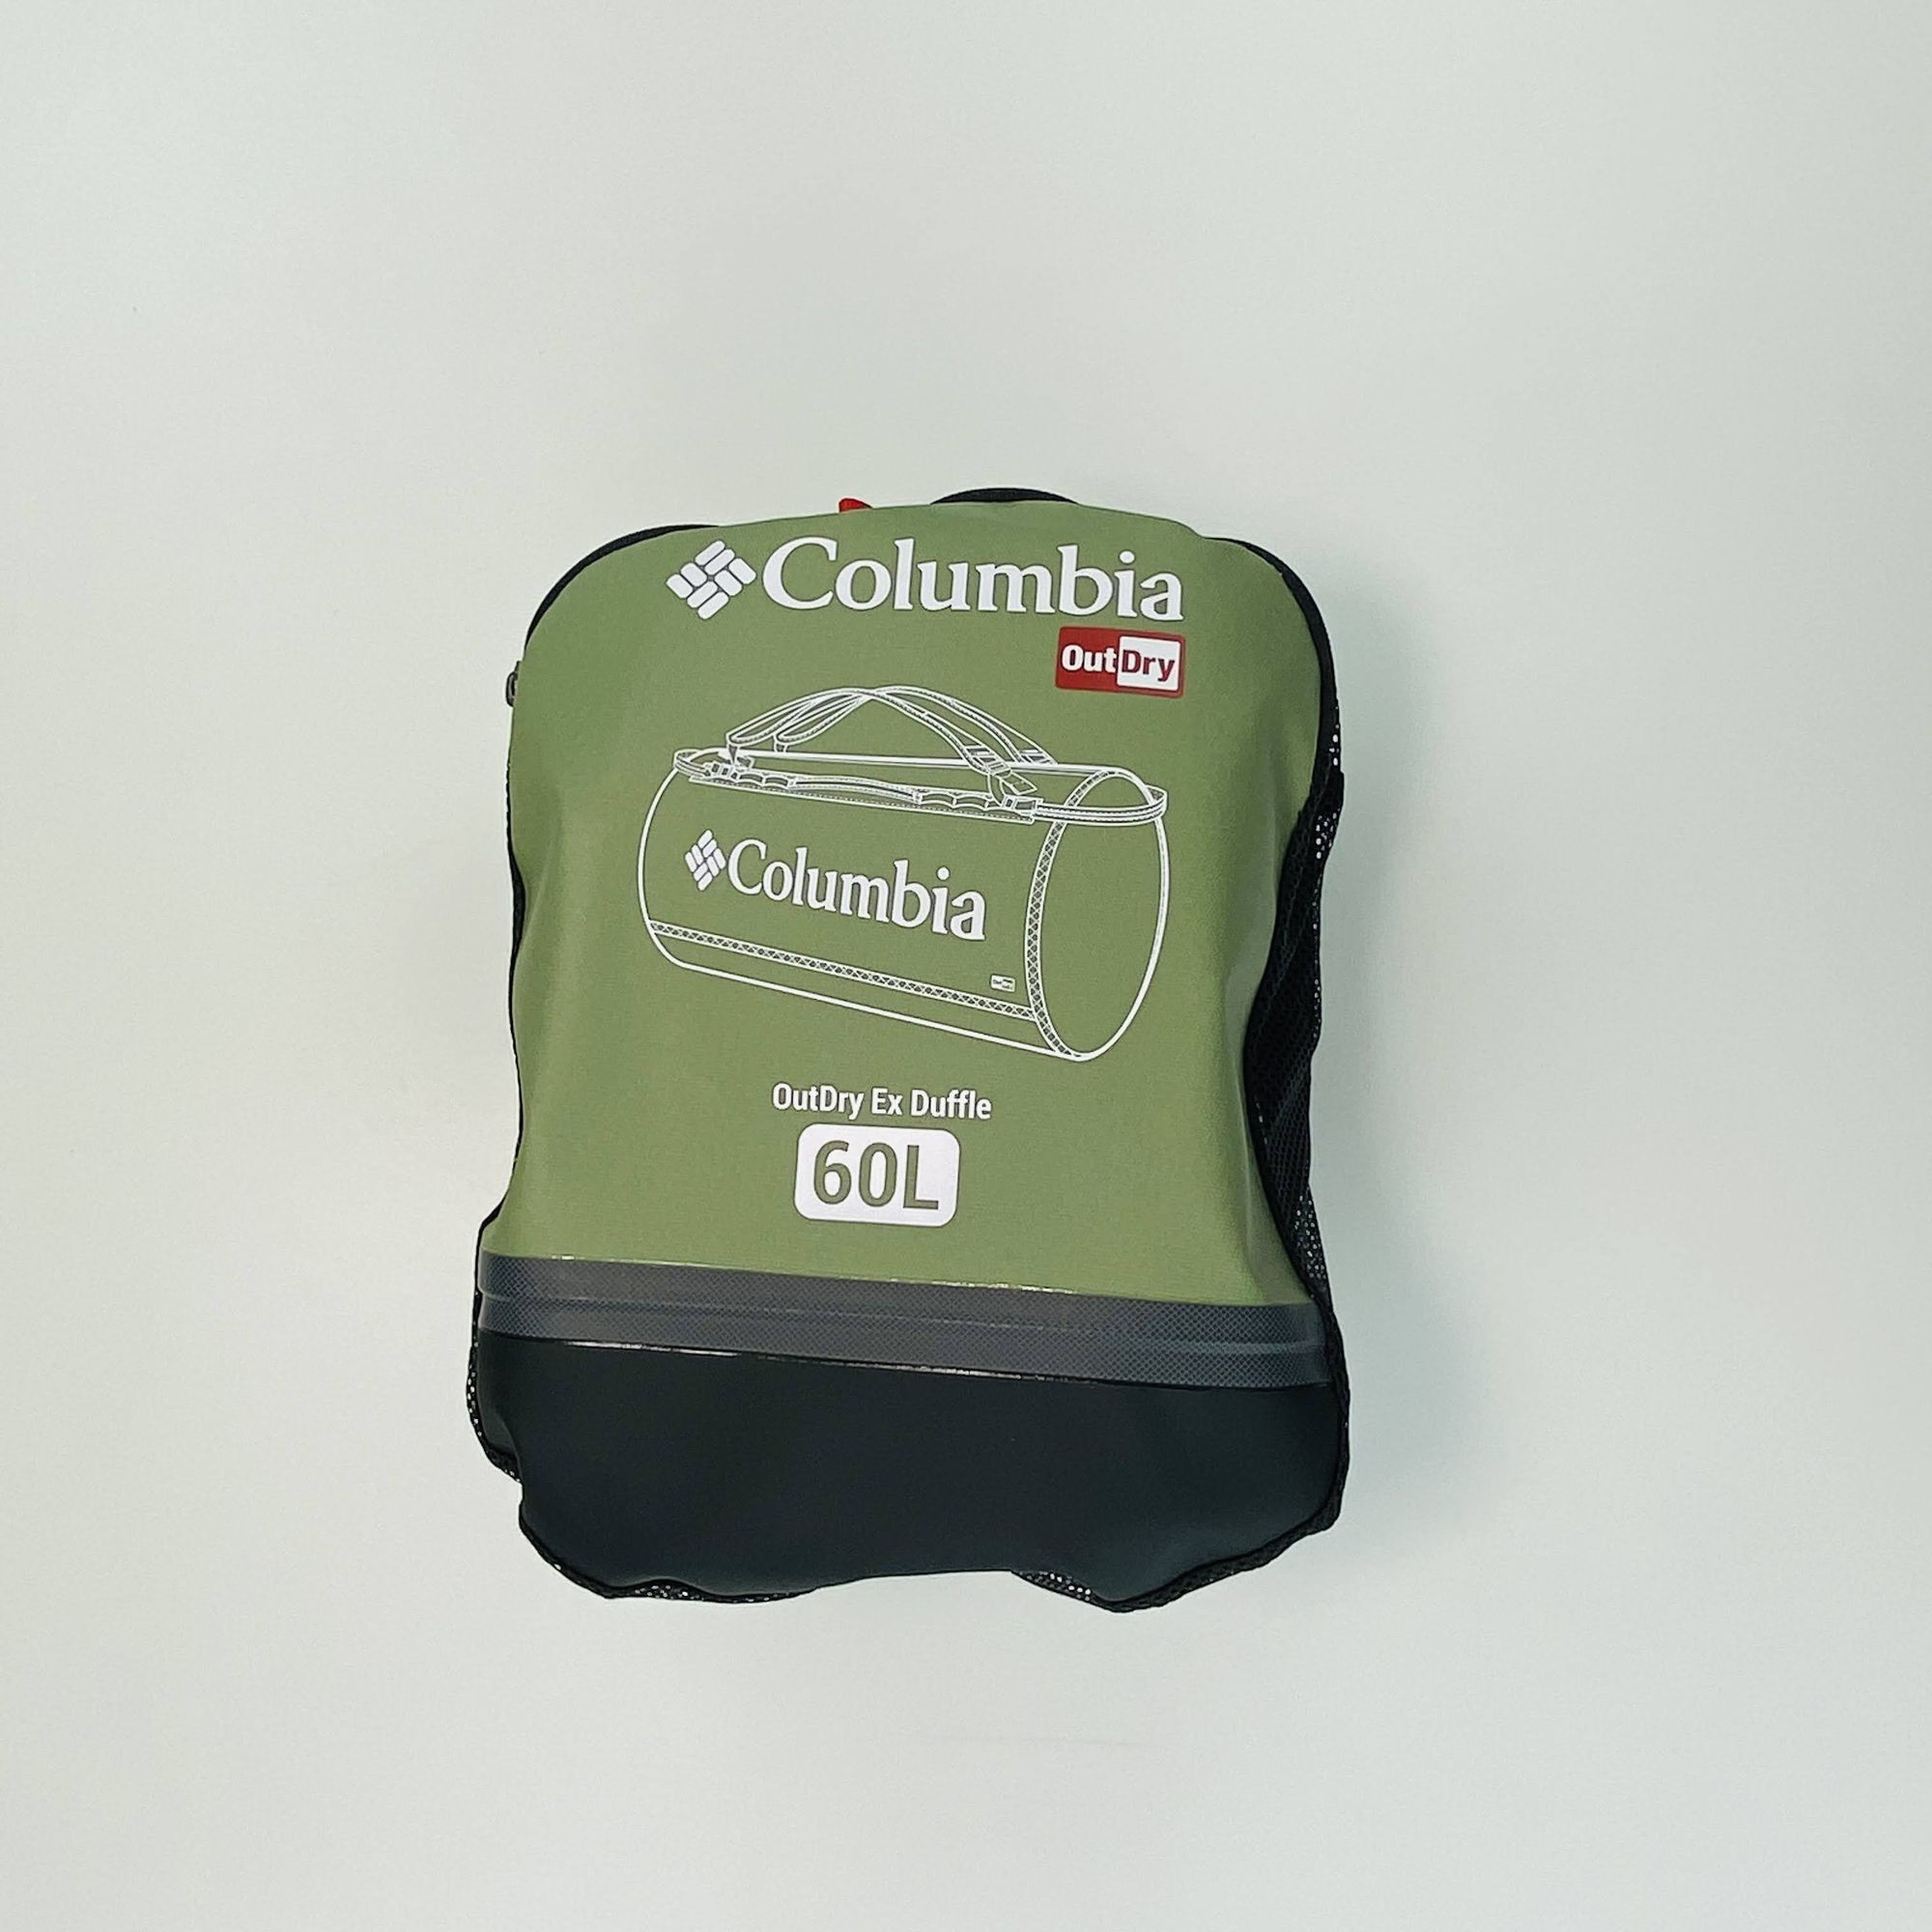 Columbia OutDry Ex™ 60L Duffle - Seconde main Duffel - Vert olive - Taille unique | Hardloop